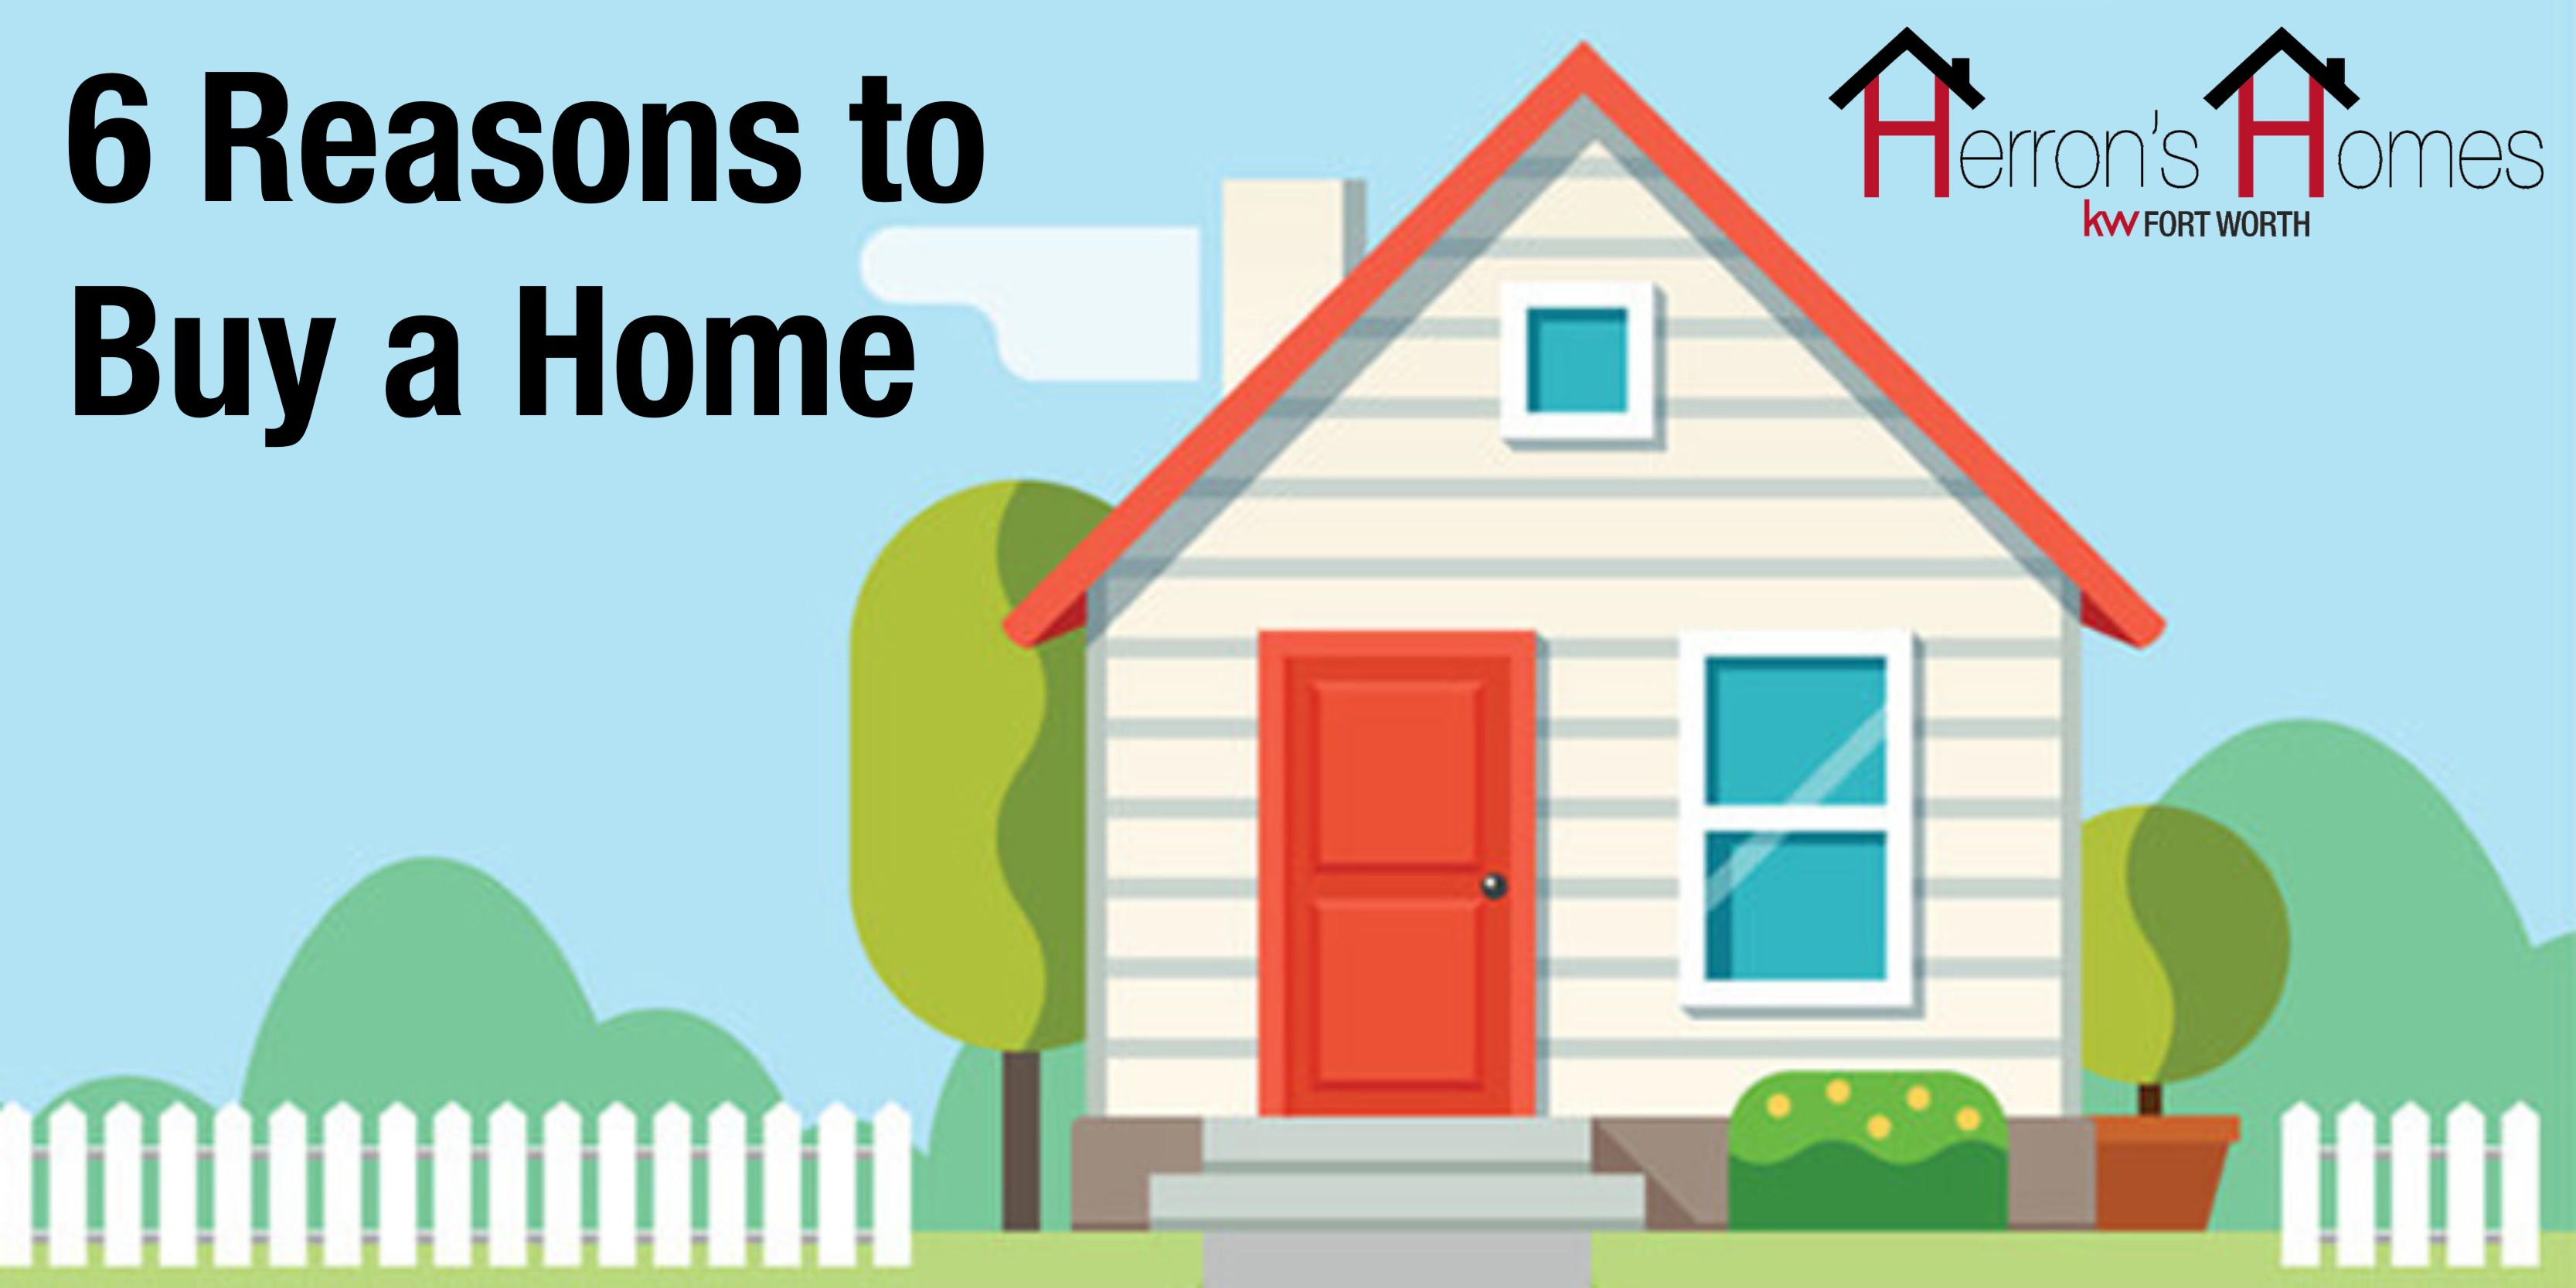 6 Reasons to Buy a Home